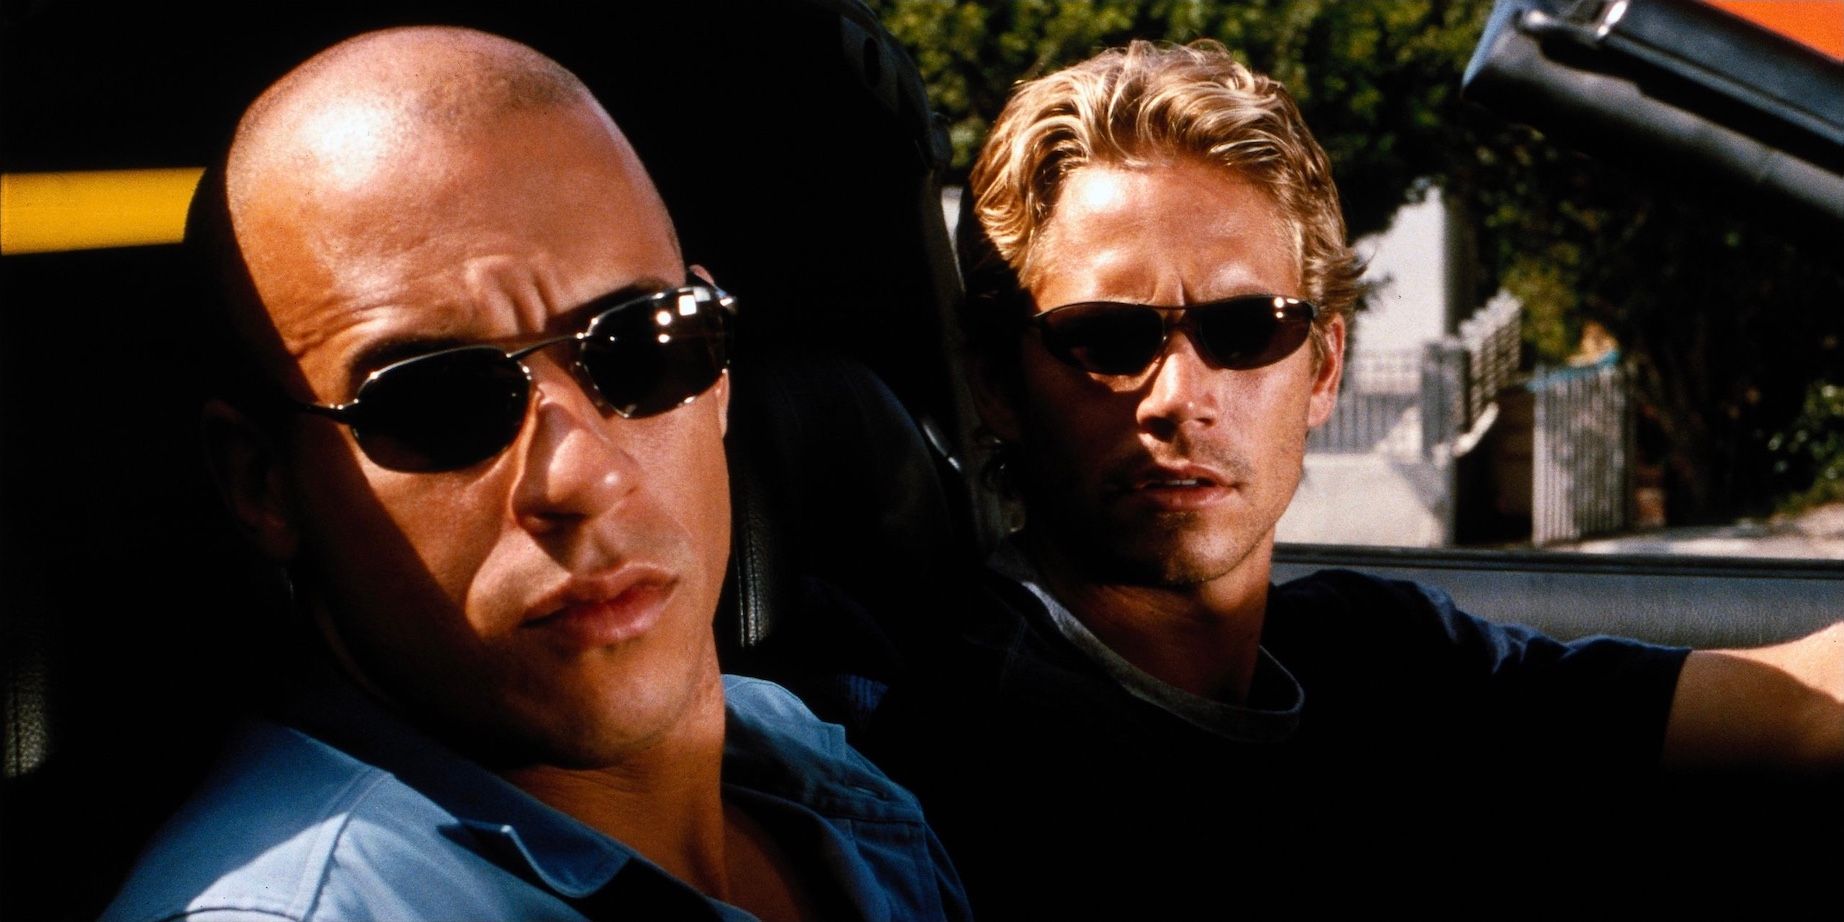 REPORT: Fast & Furious 11 Will Go 'Back to Basics' With New Villain,  Smaller Budget